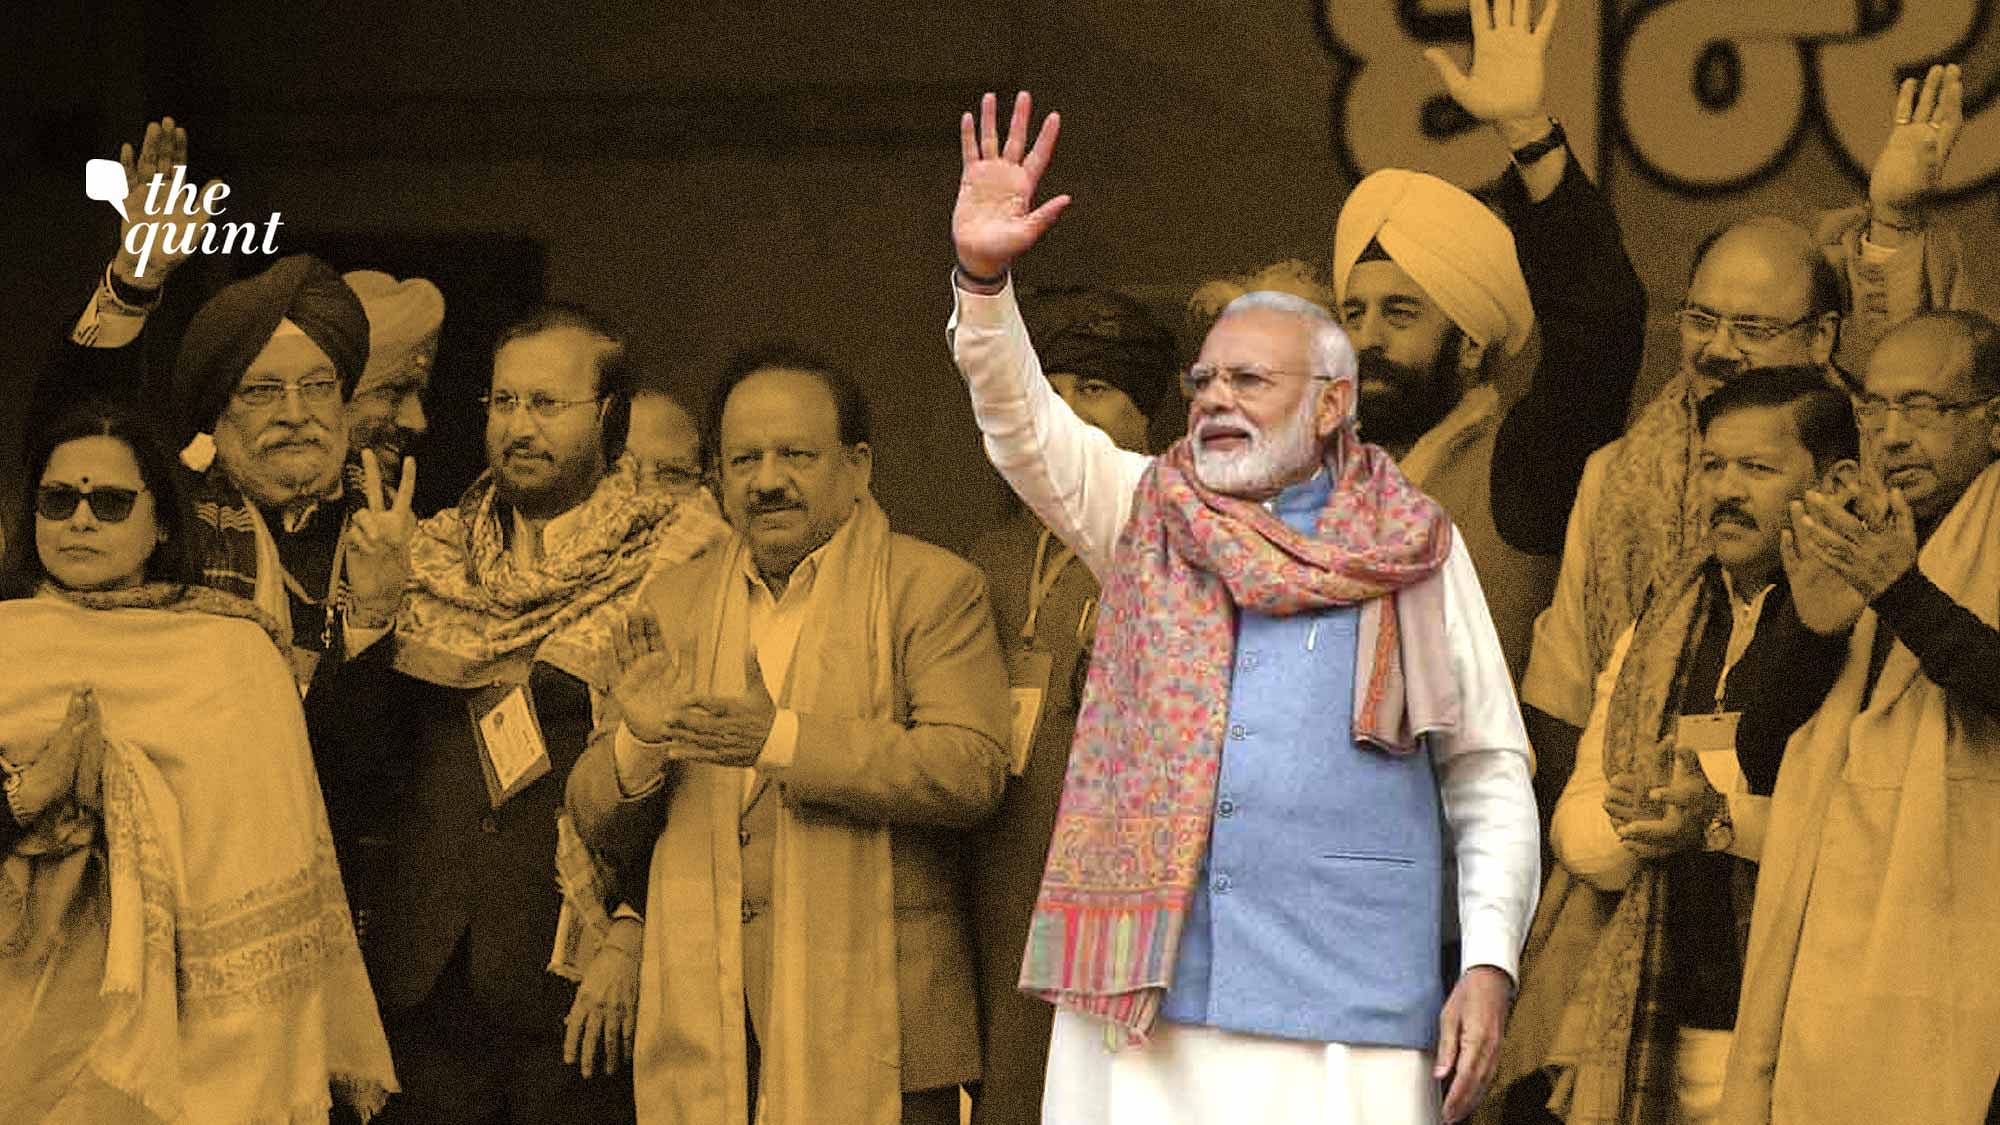 Prime Minister Narendra Modi addressed a rally in Delhi on 22 December, focussing on regularisation of unauthorised colonies.